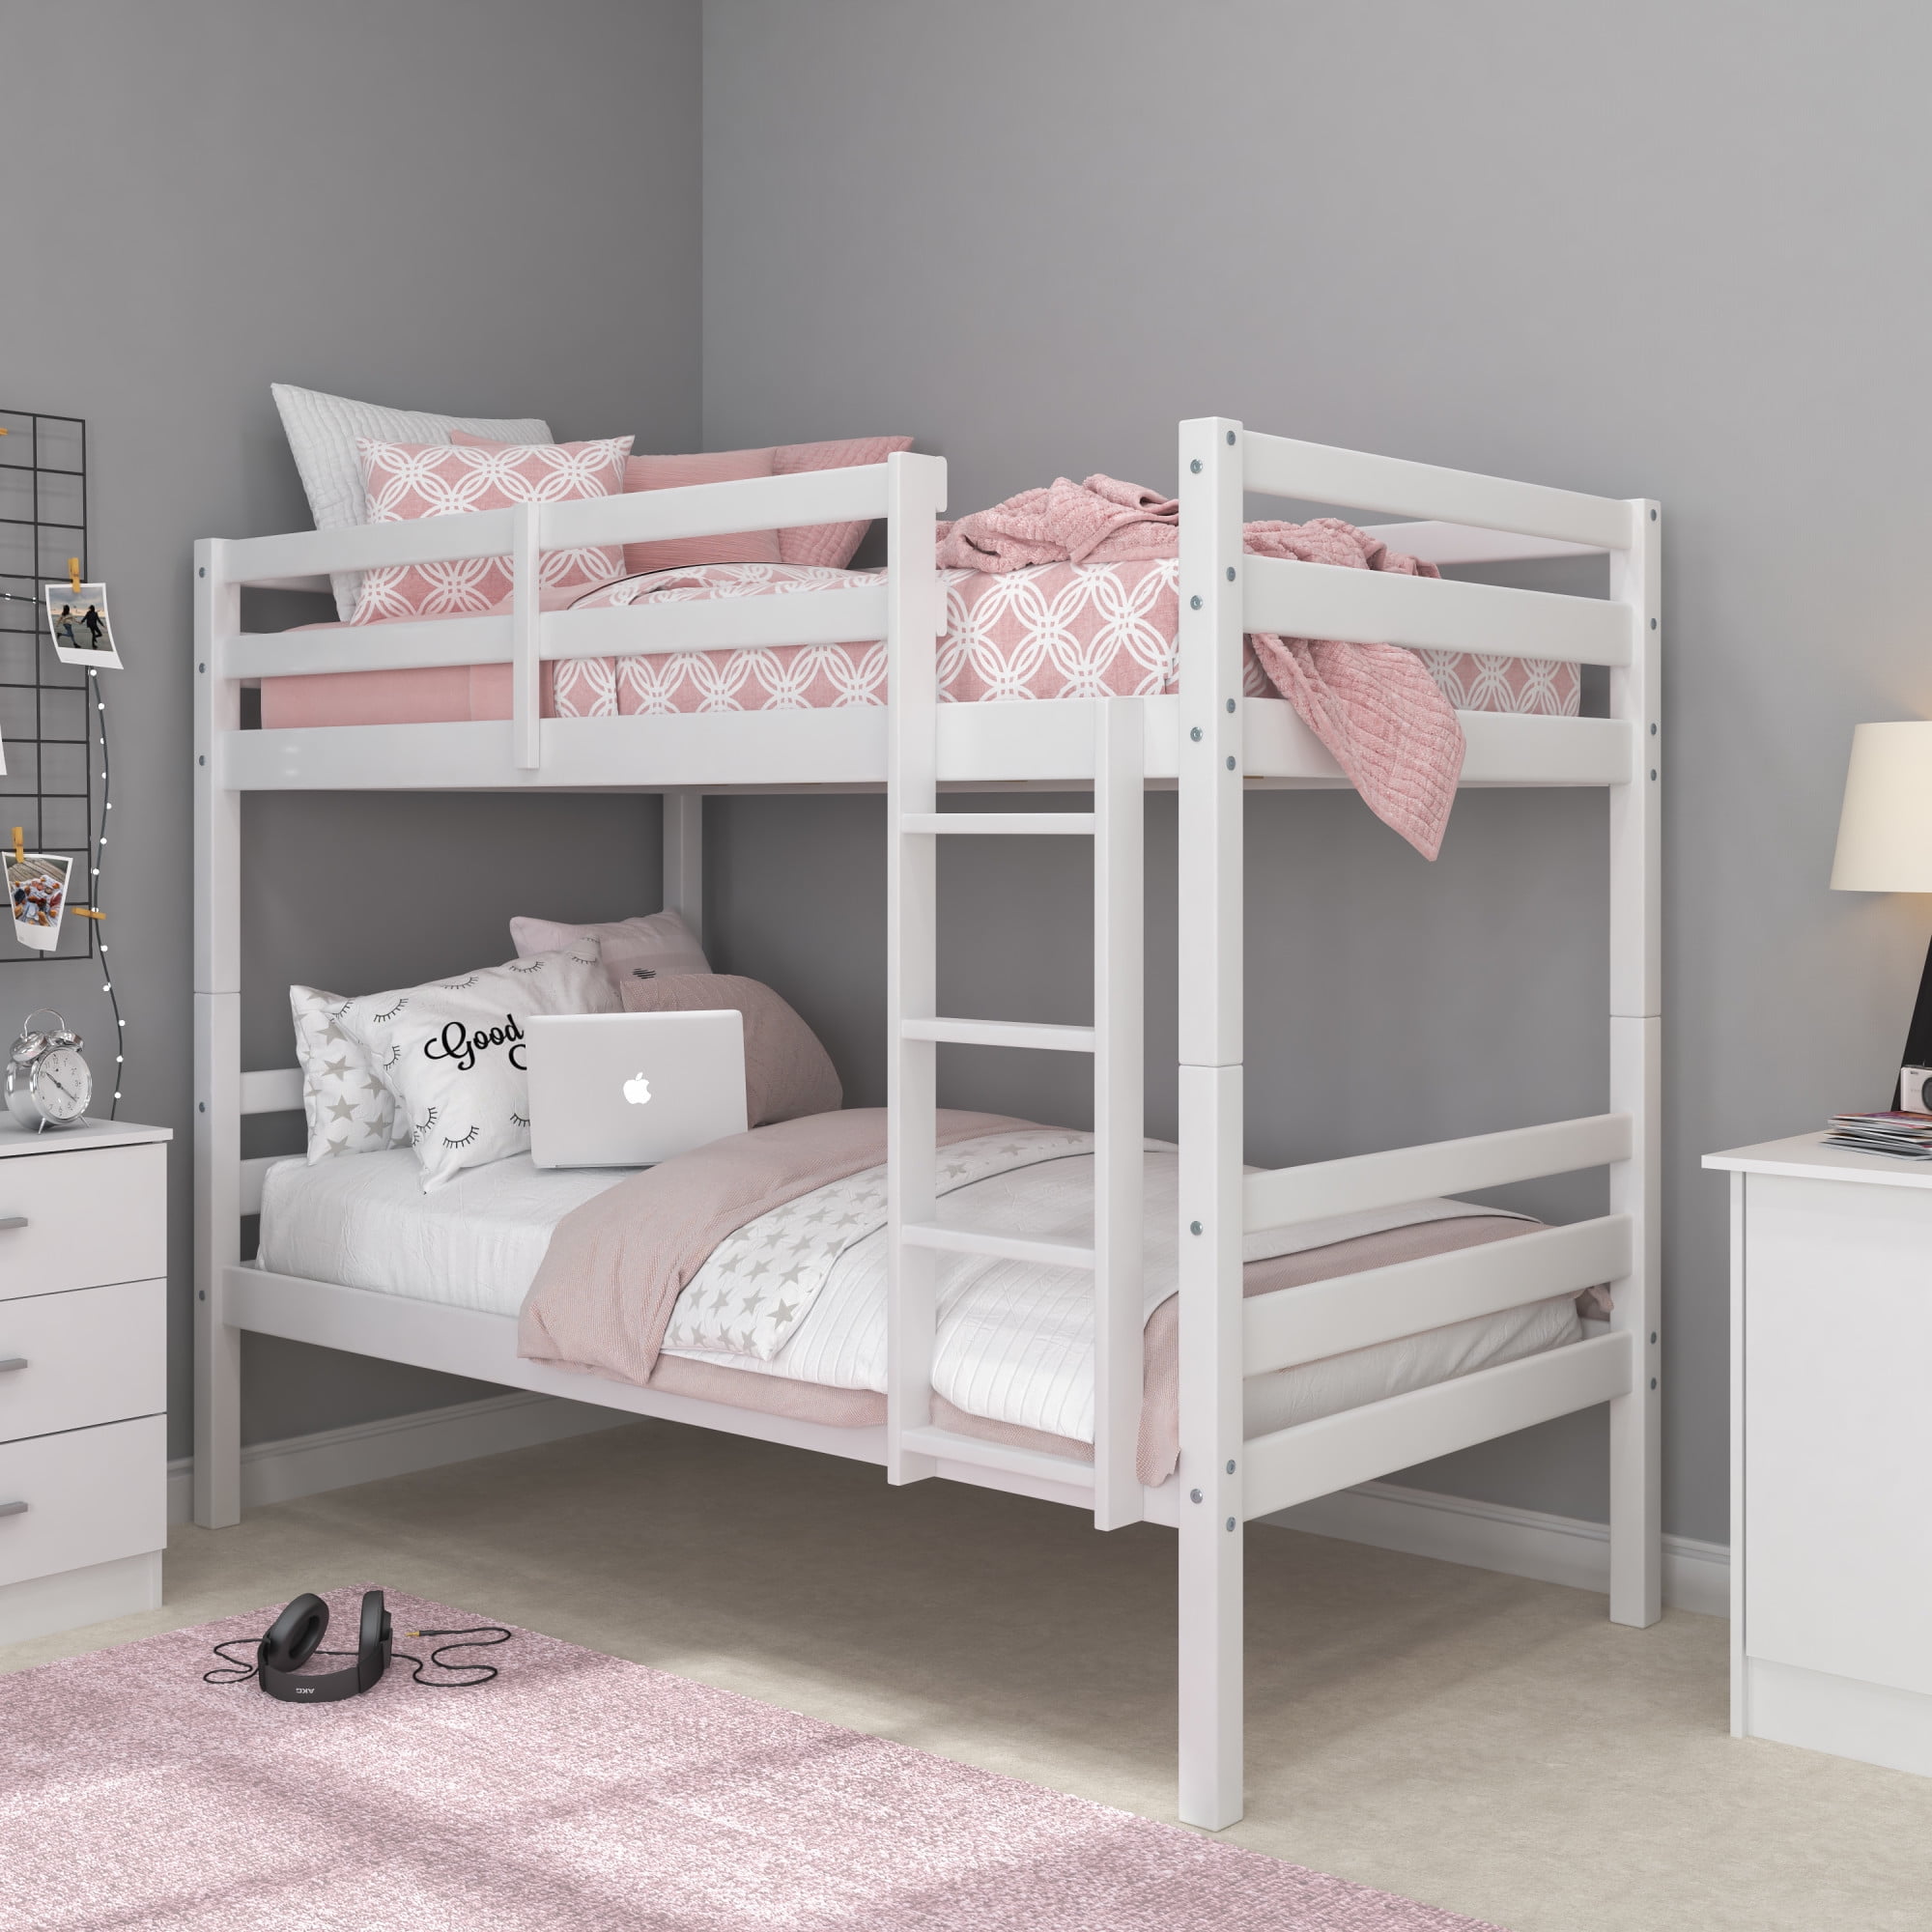 Campbell Wood Twin Over Bunk Bed, How To Make Bunk Beds Out Of Twin